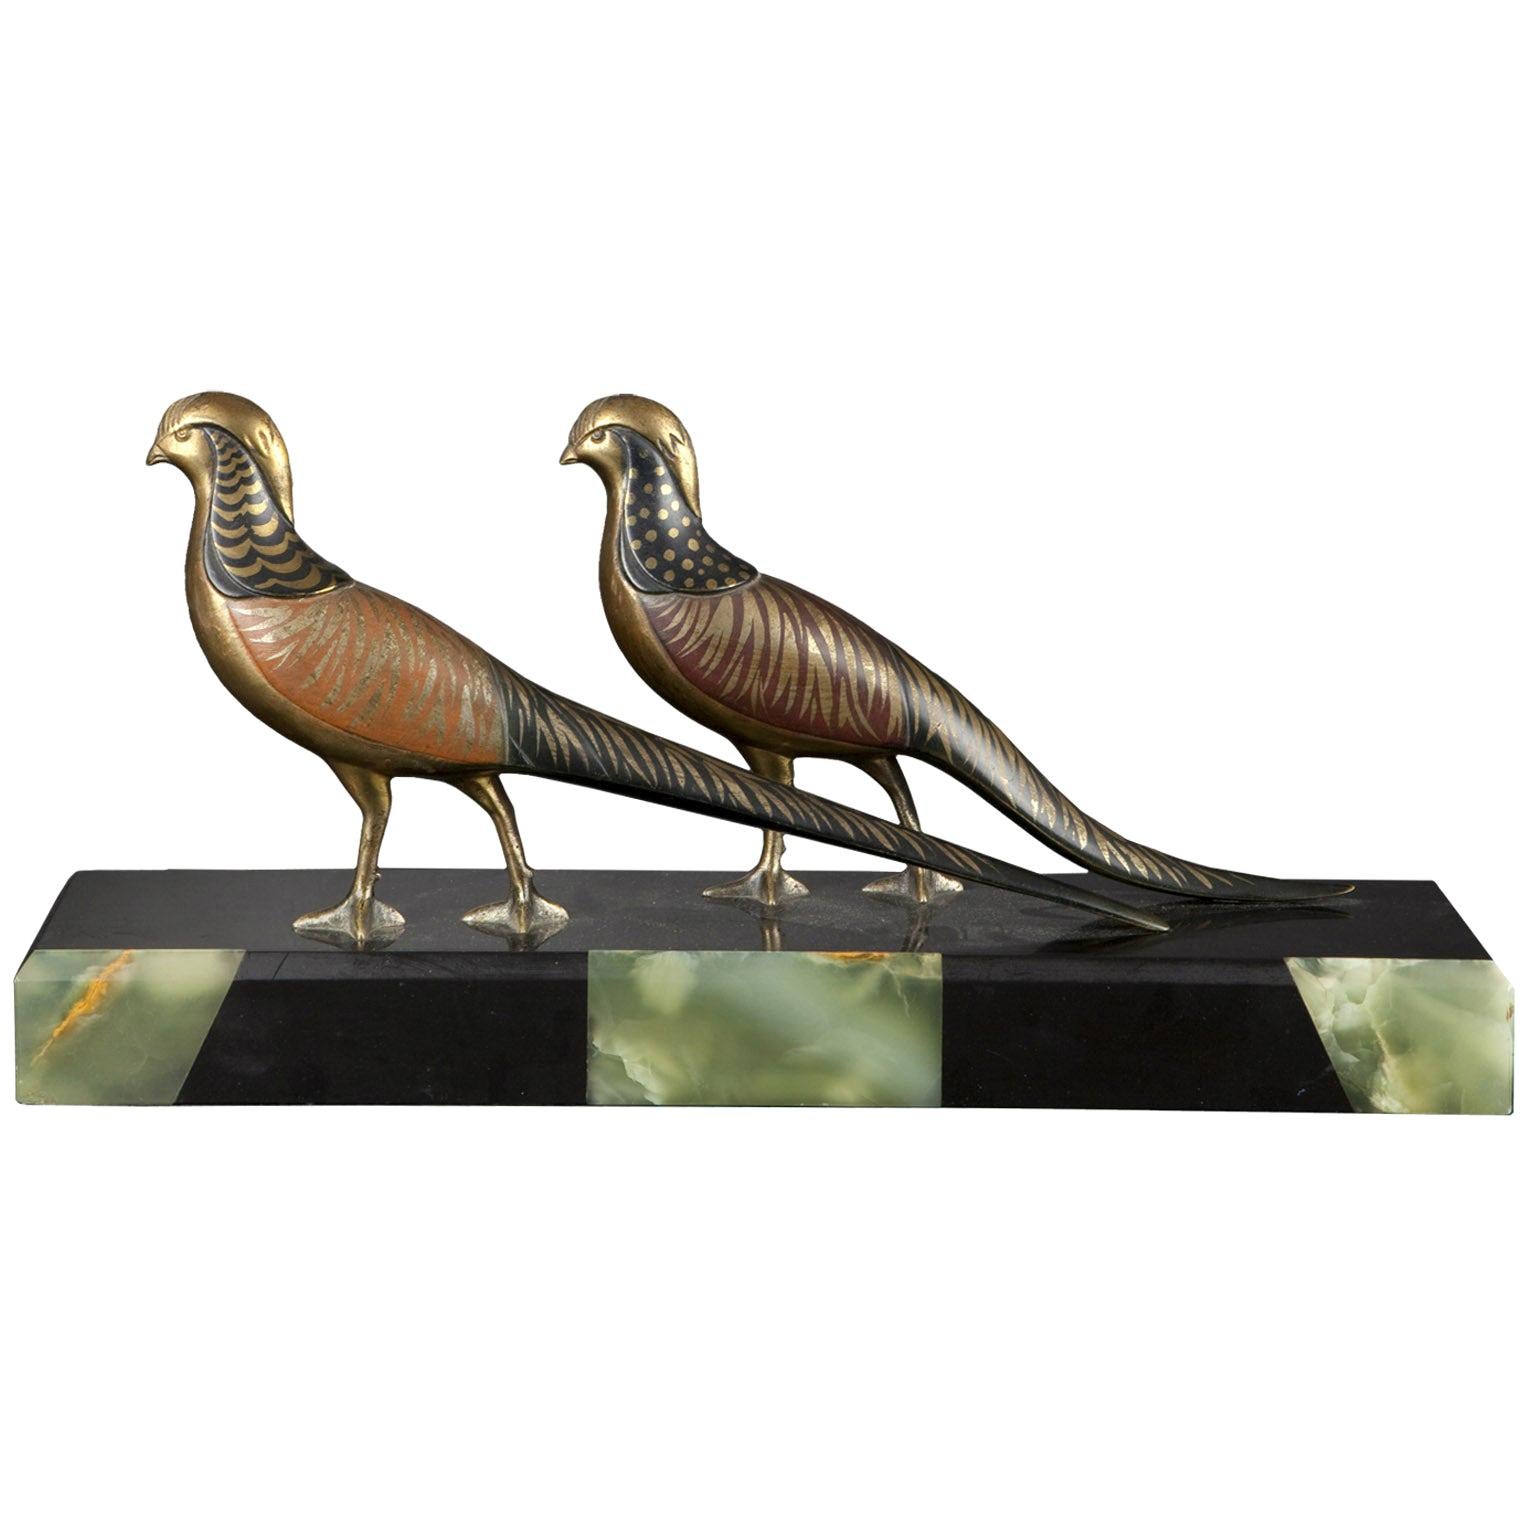 Art Deco Pheasants Polychrome, Gilt Bronze, Marble and Onyx Base by M. Secondo